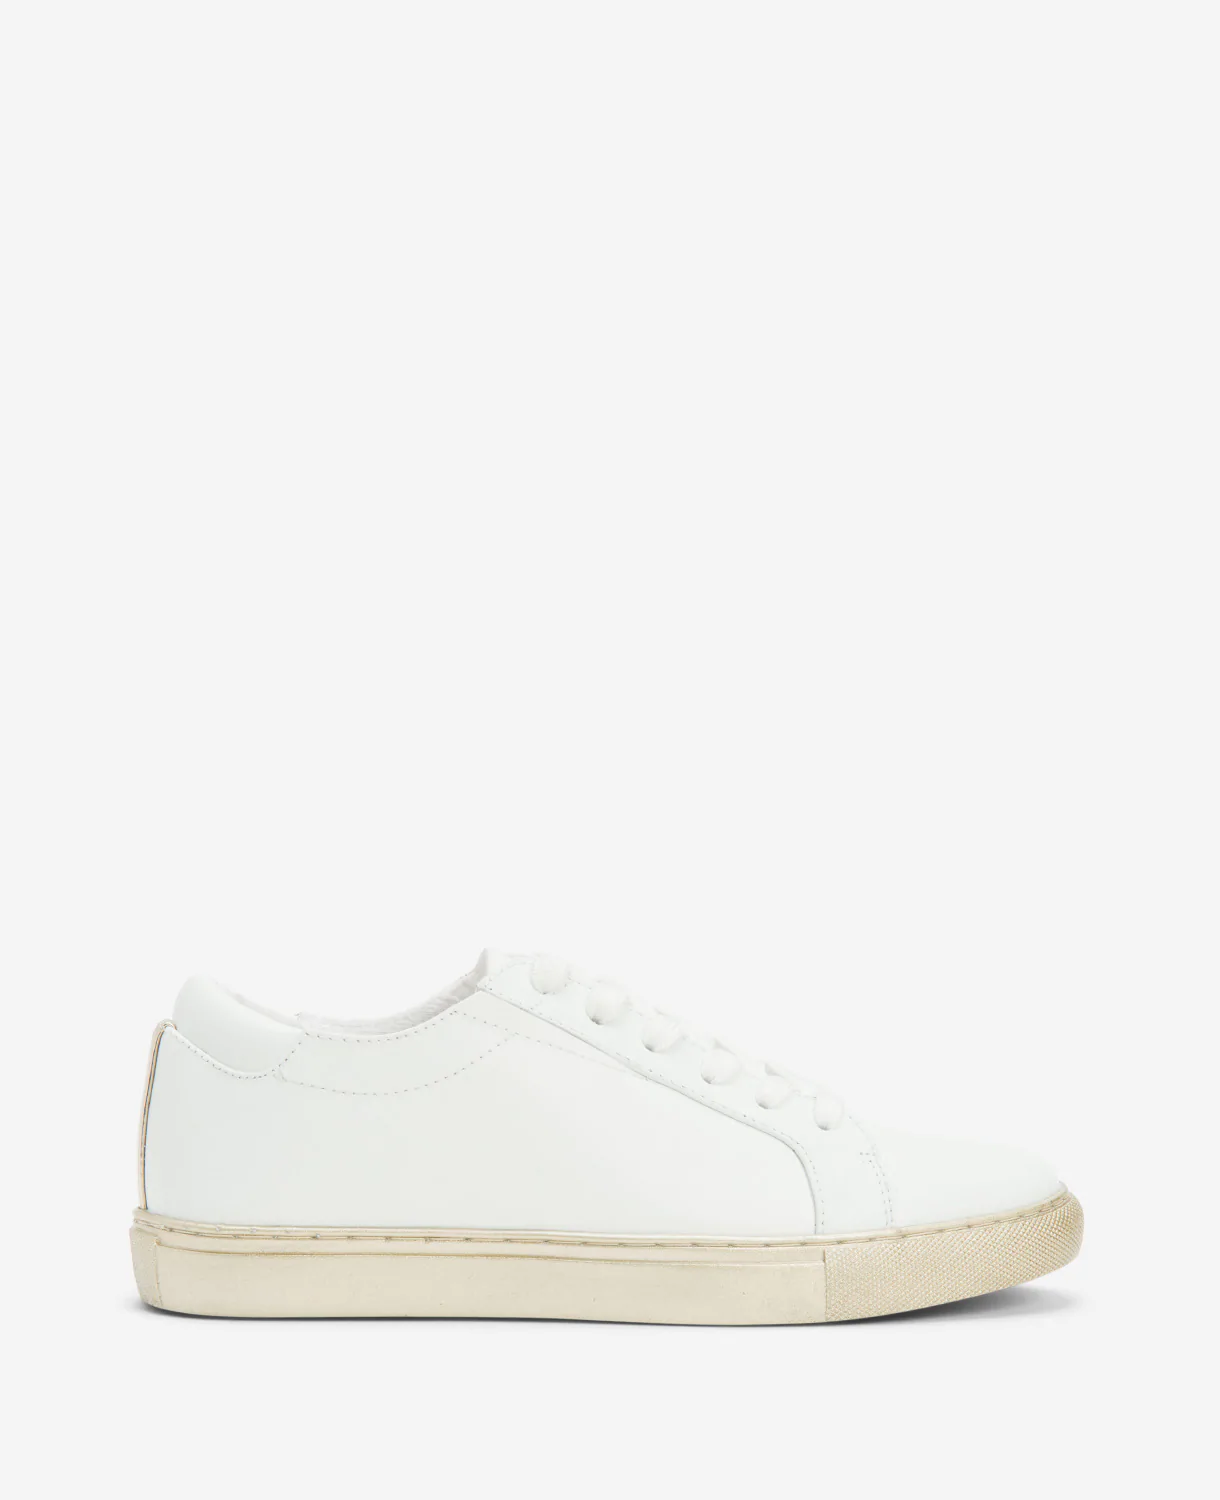 Kenneth Cole + Kam Accent Leather Sneaker